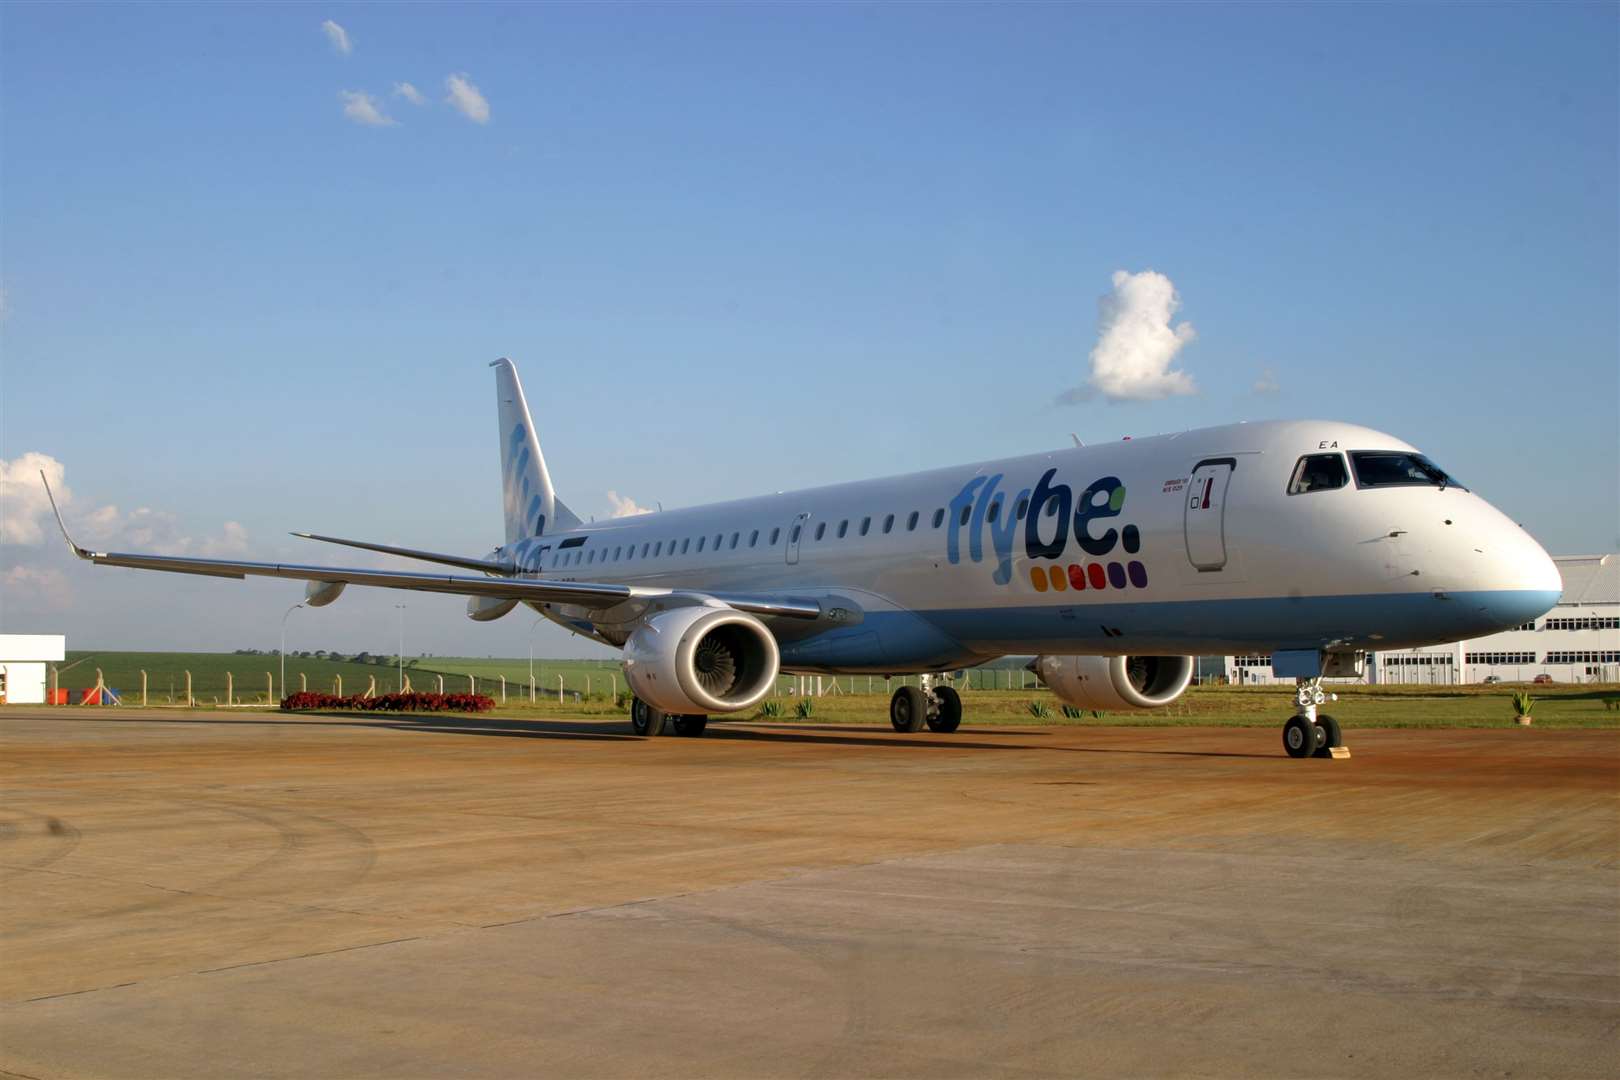 Flybe, which was in financial trouble and facing a turbulent future, received support from the UK Government.